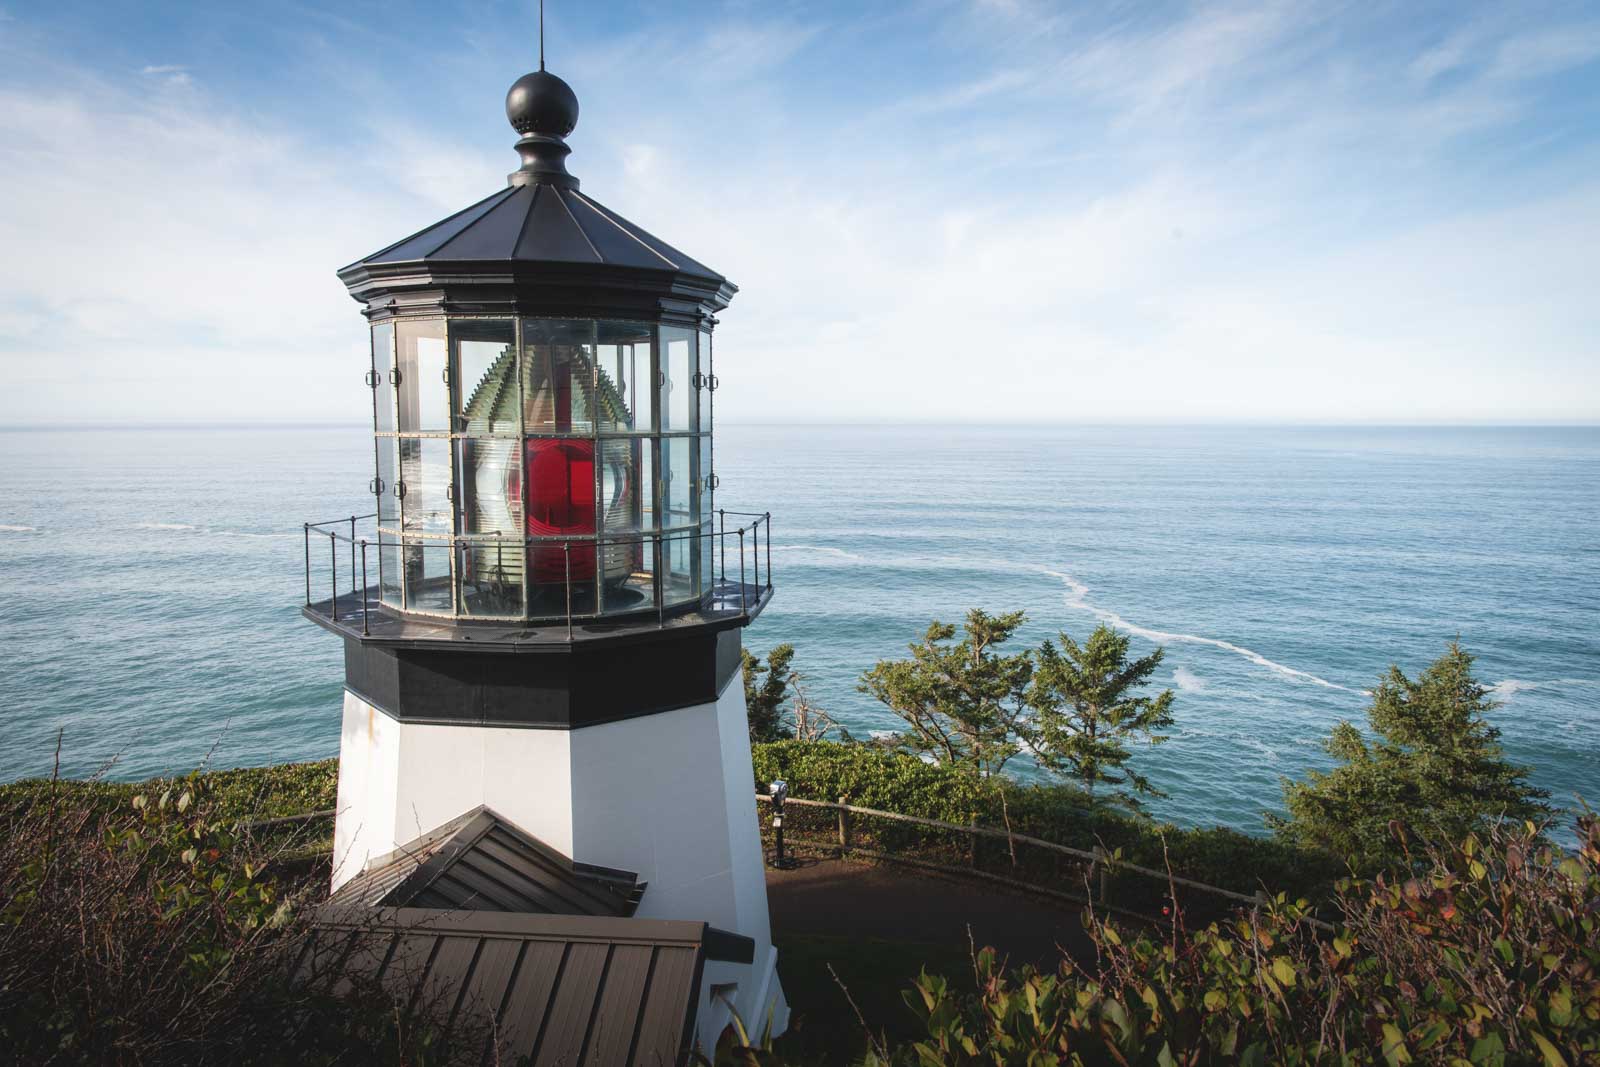 Exploring Cape Meares State Scenic Viewpoint